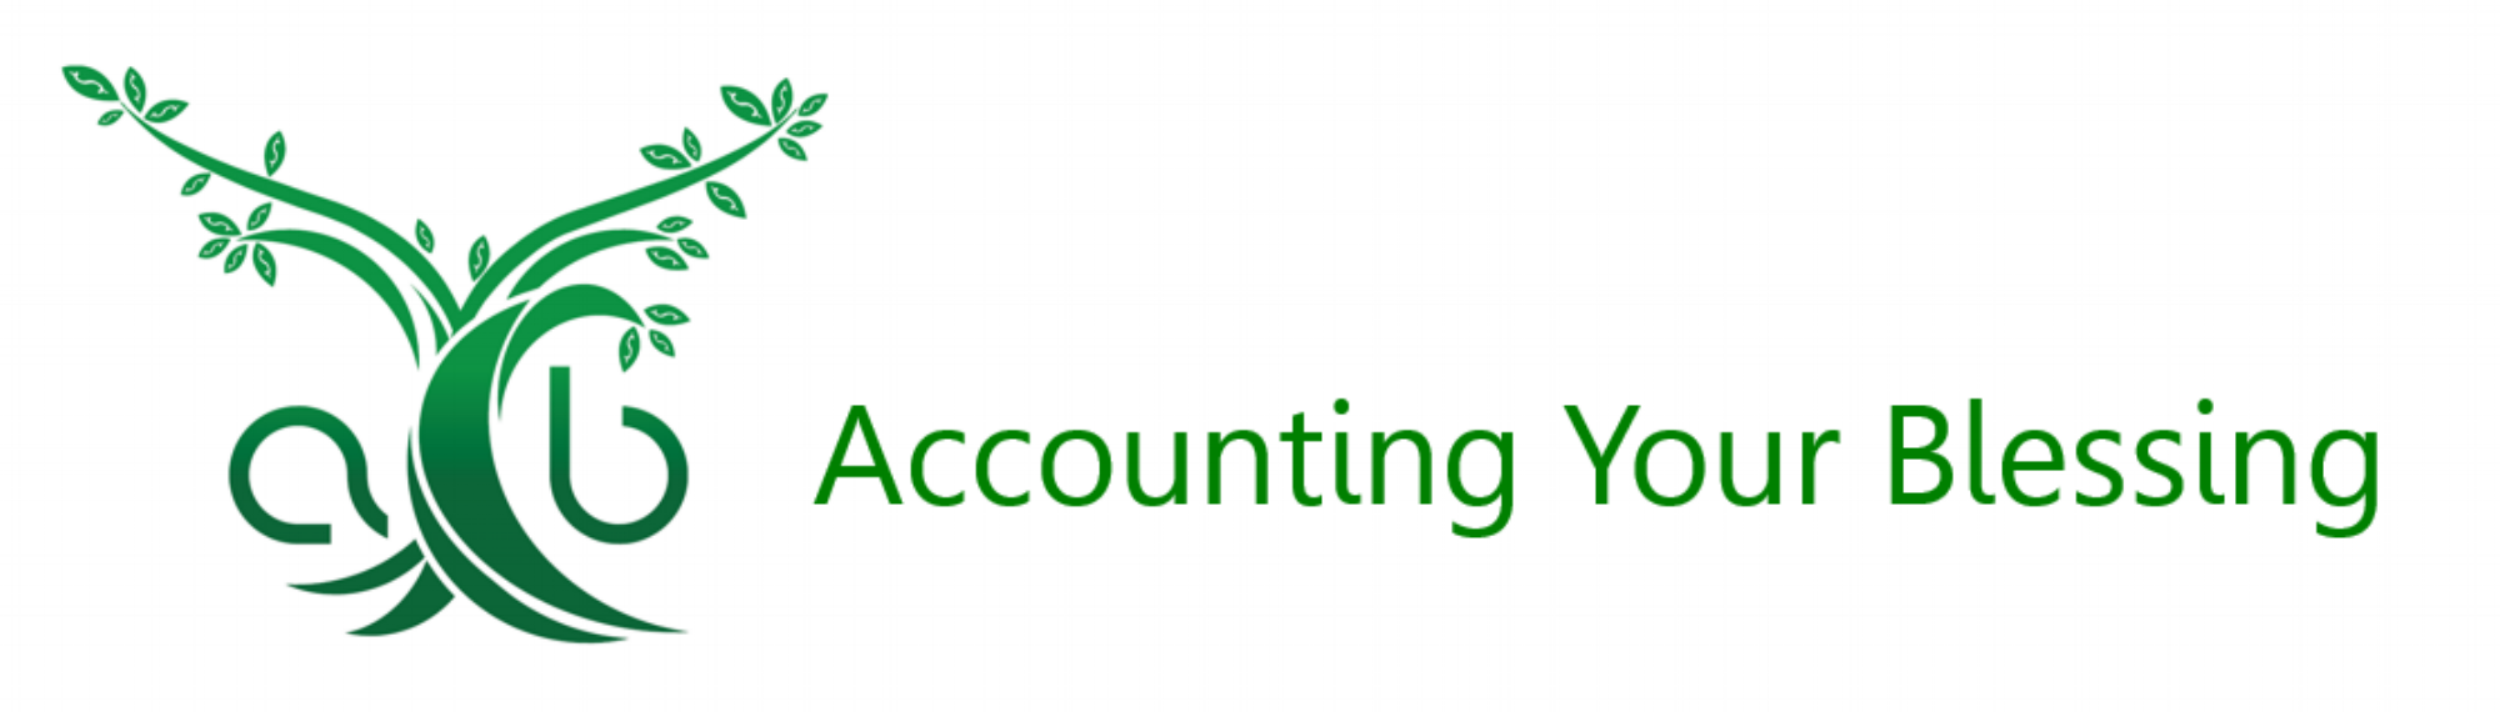 Accounting Your Blessing